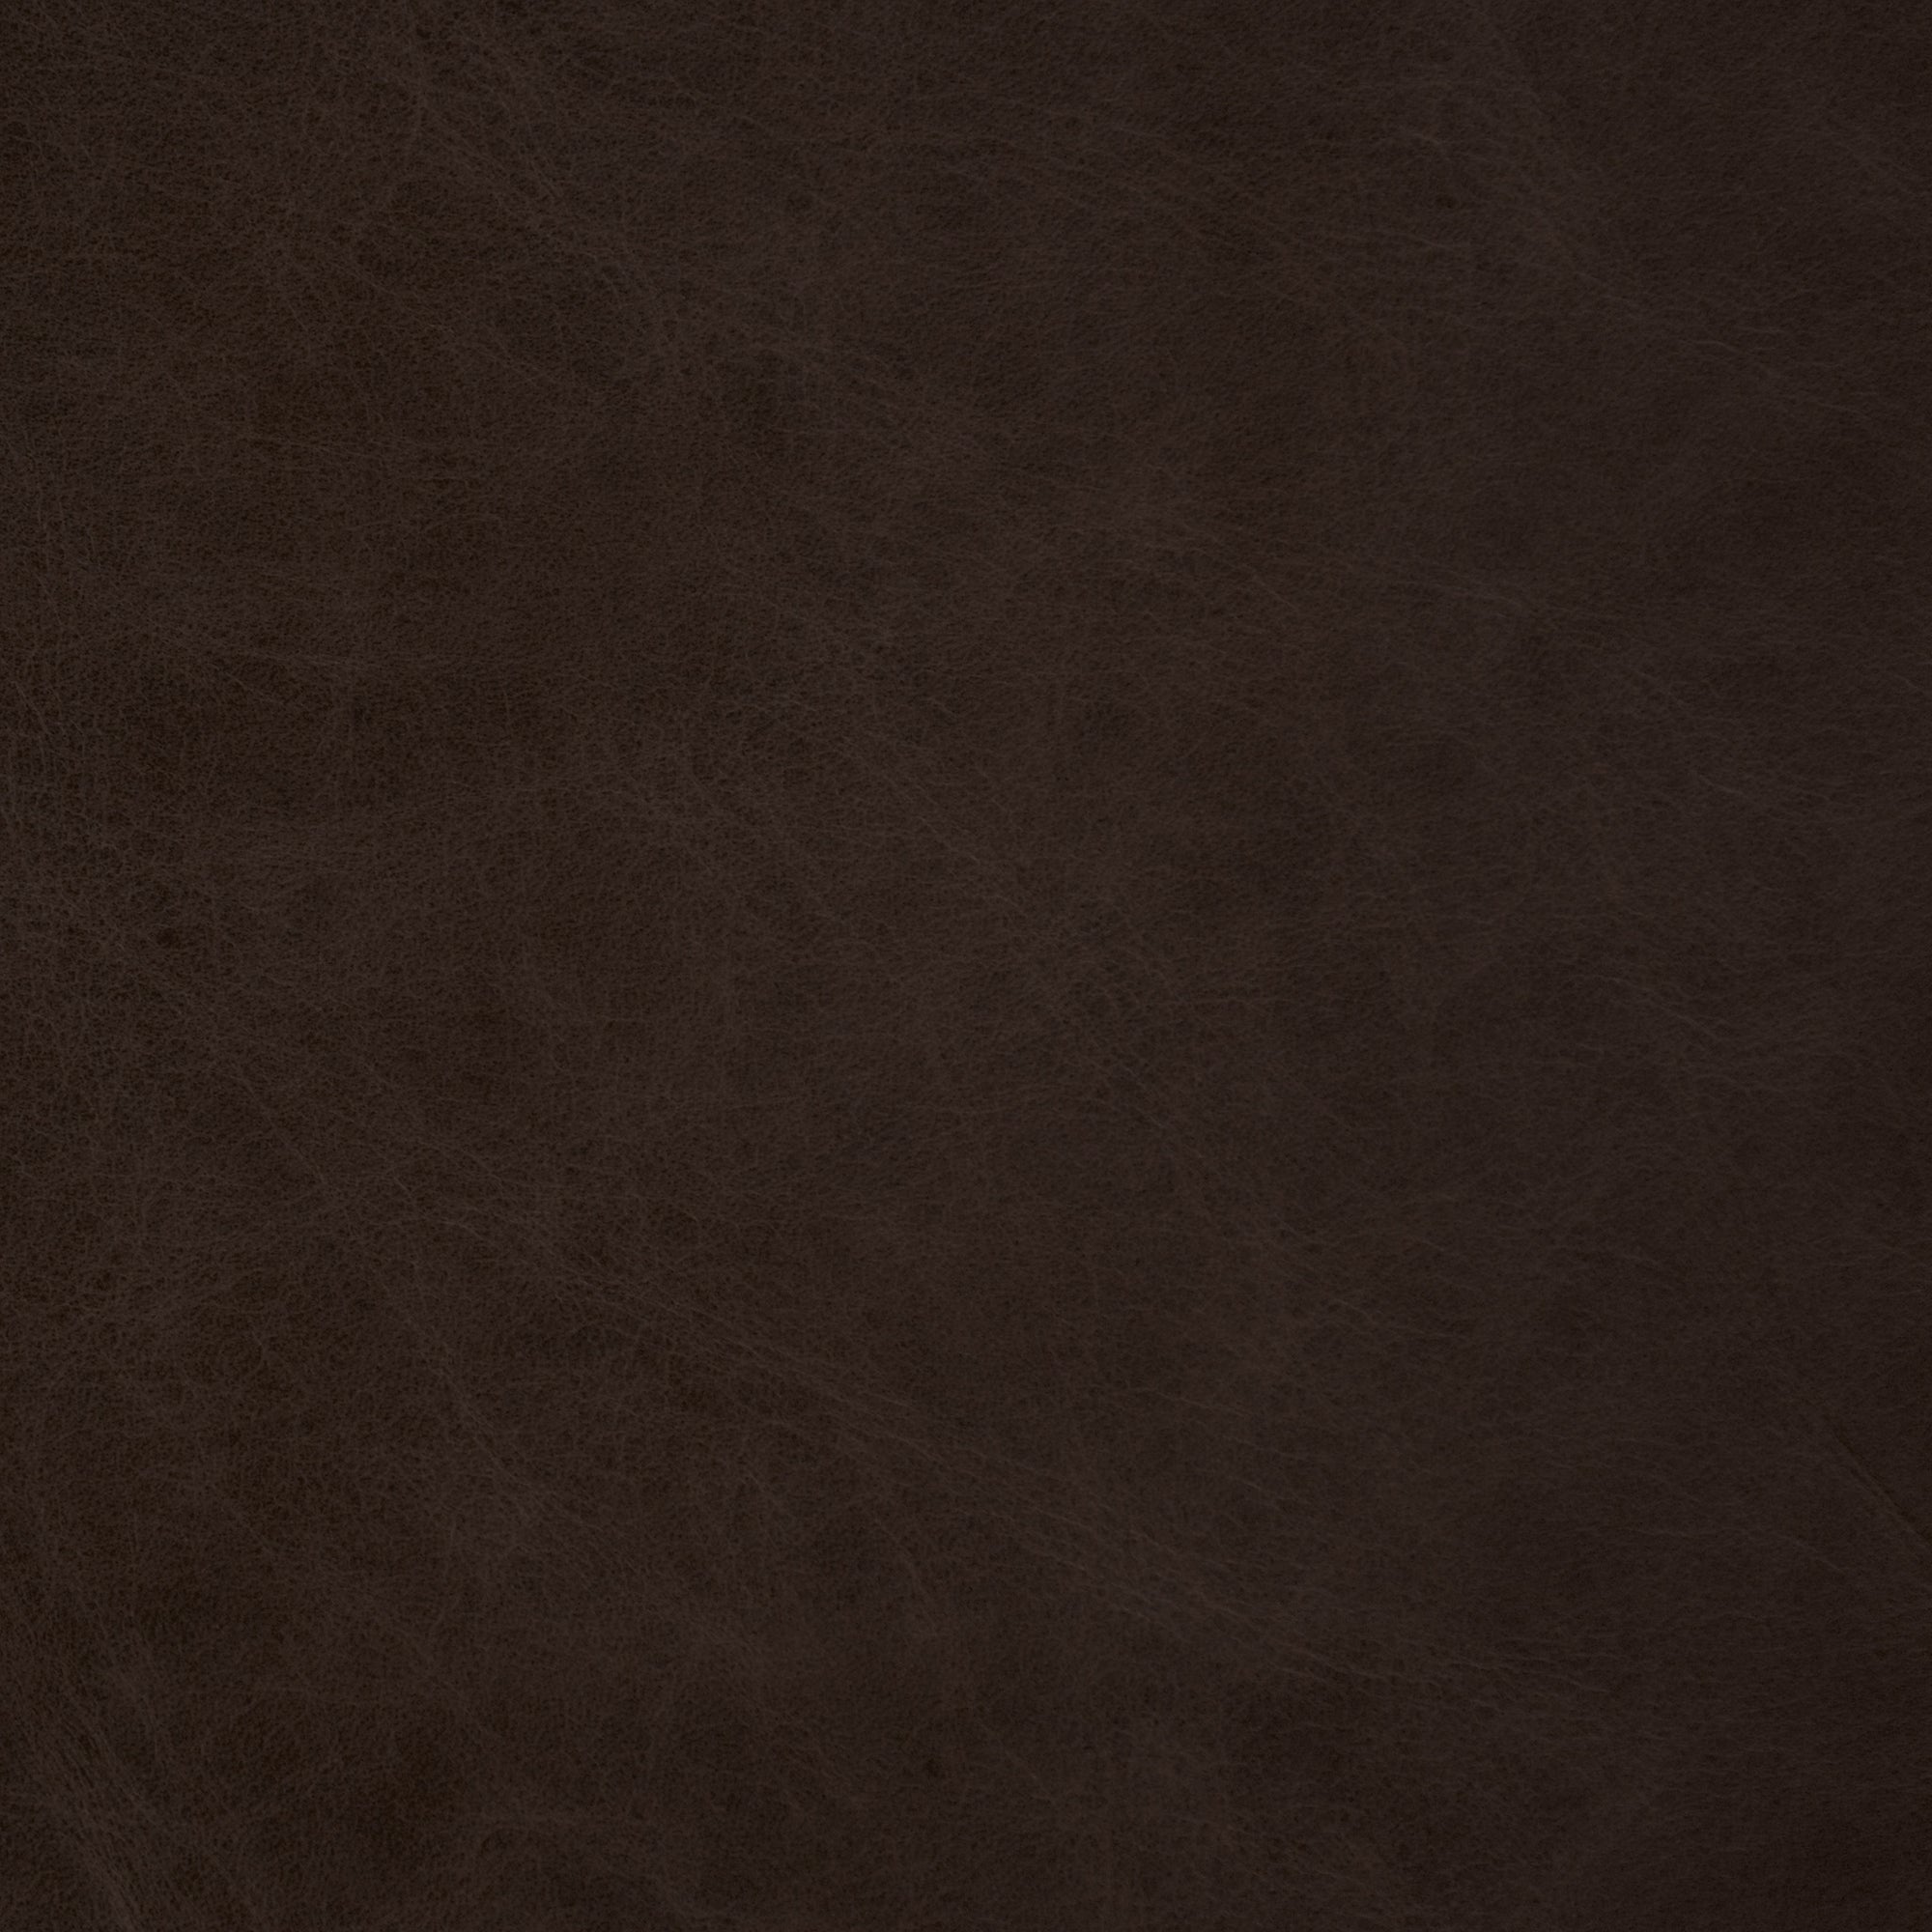 Chocolate Salerno Leather -  Swatch